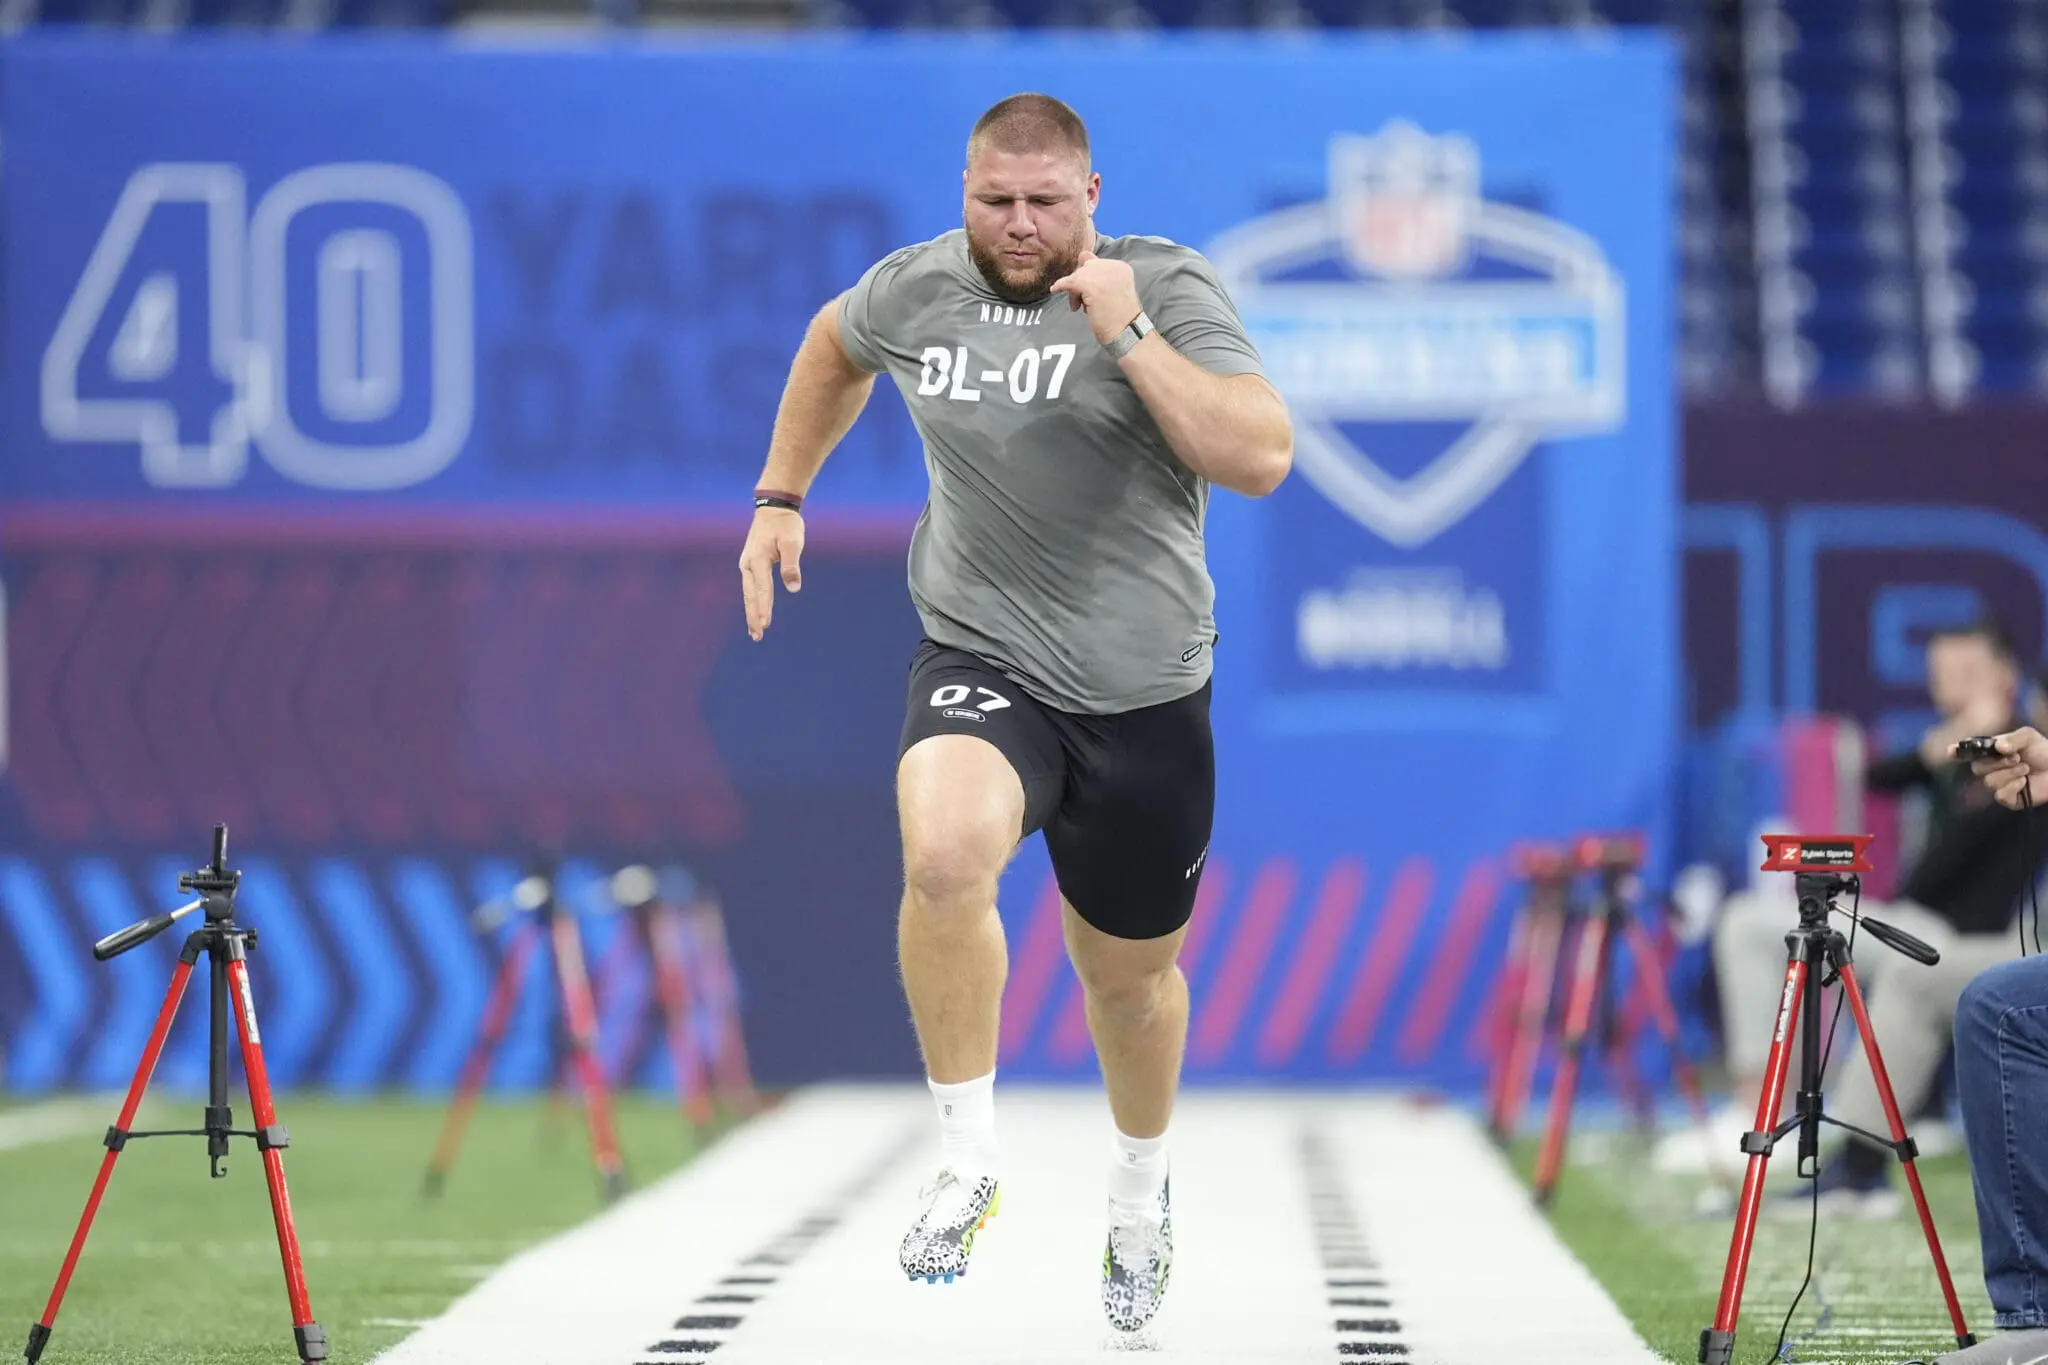 NFL News: Los Angeles Rams’ Bold Move, Braden Fiske Draft Pick Could Be a Game-Changer